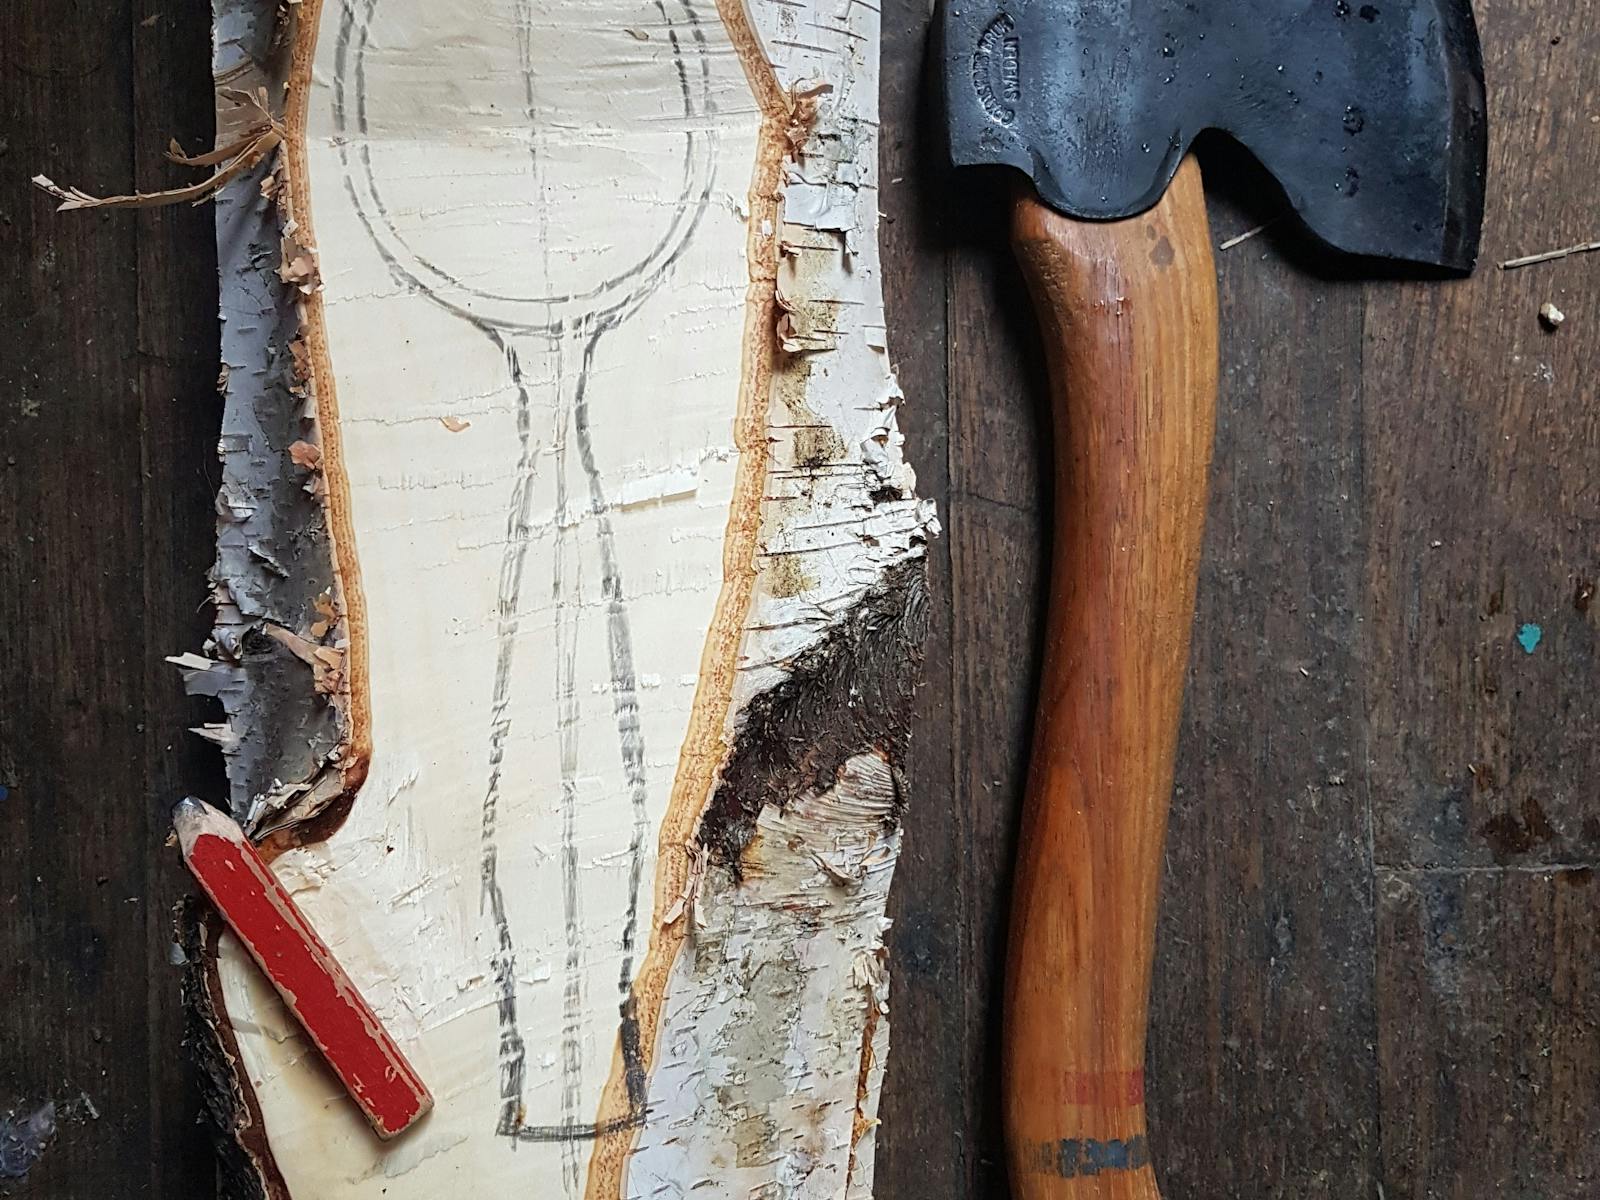 Salvage birch log being transformed into a spoon